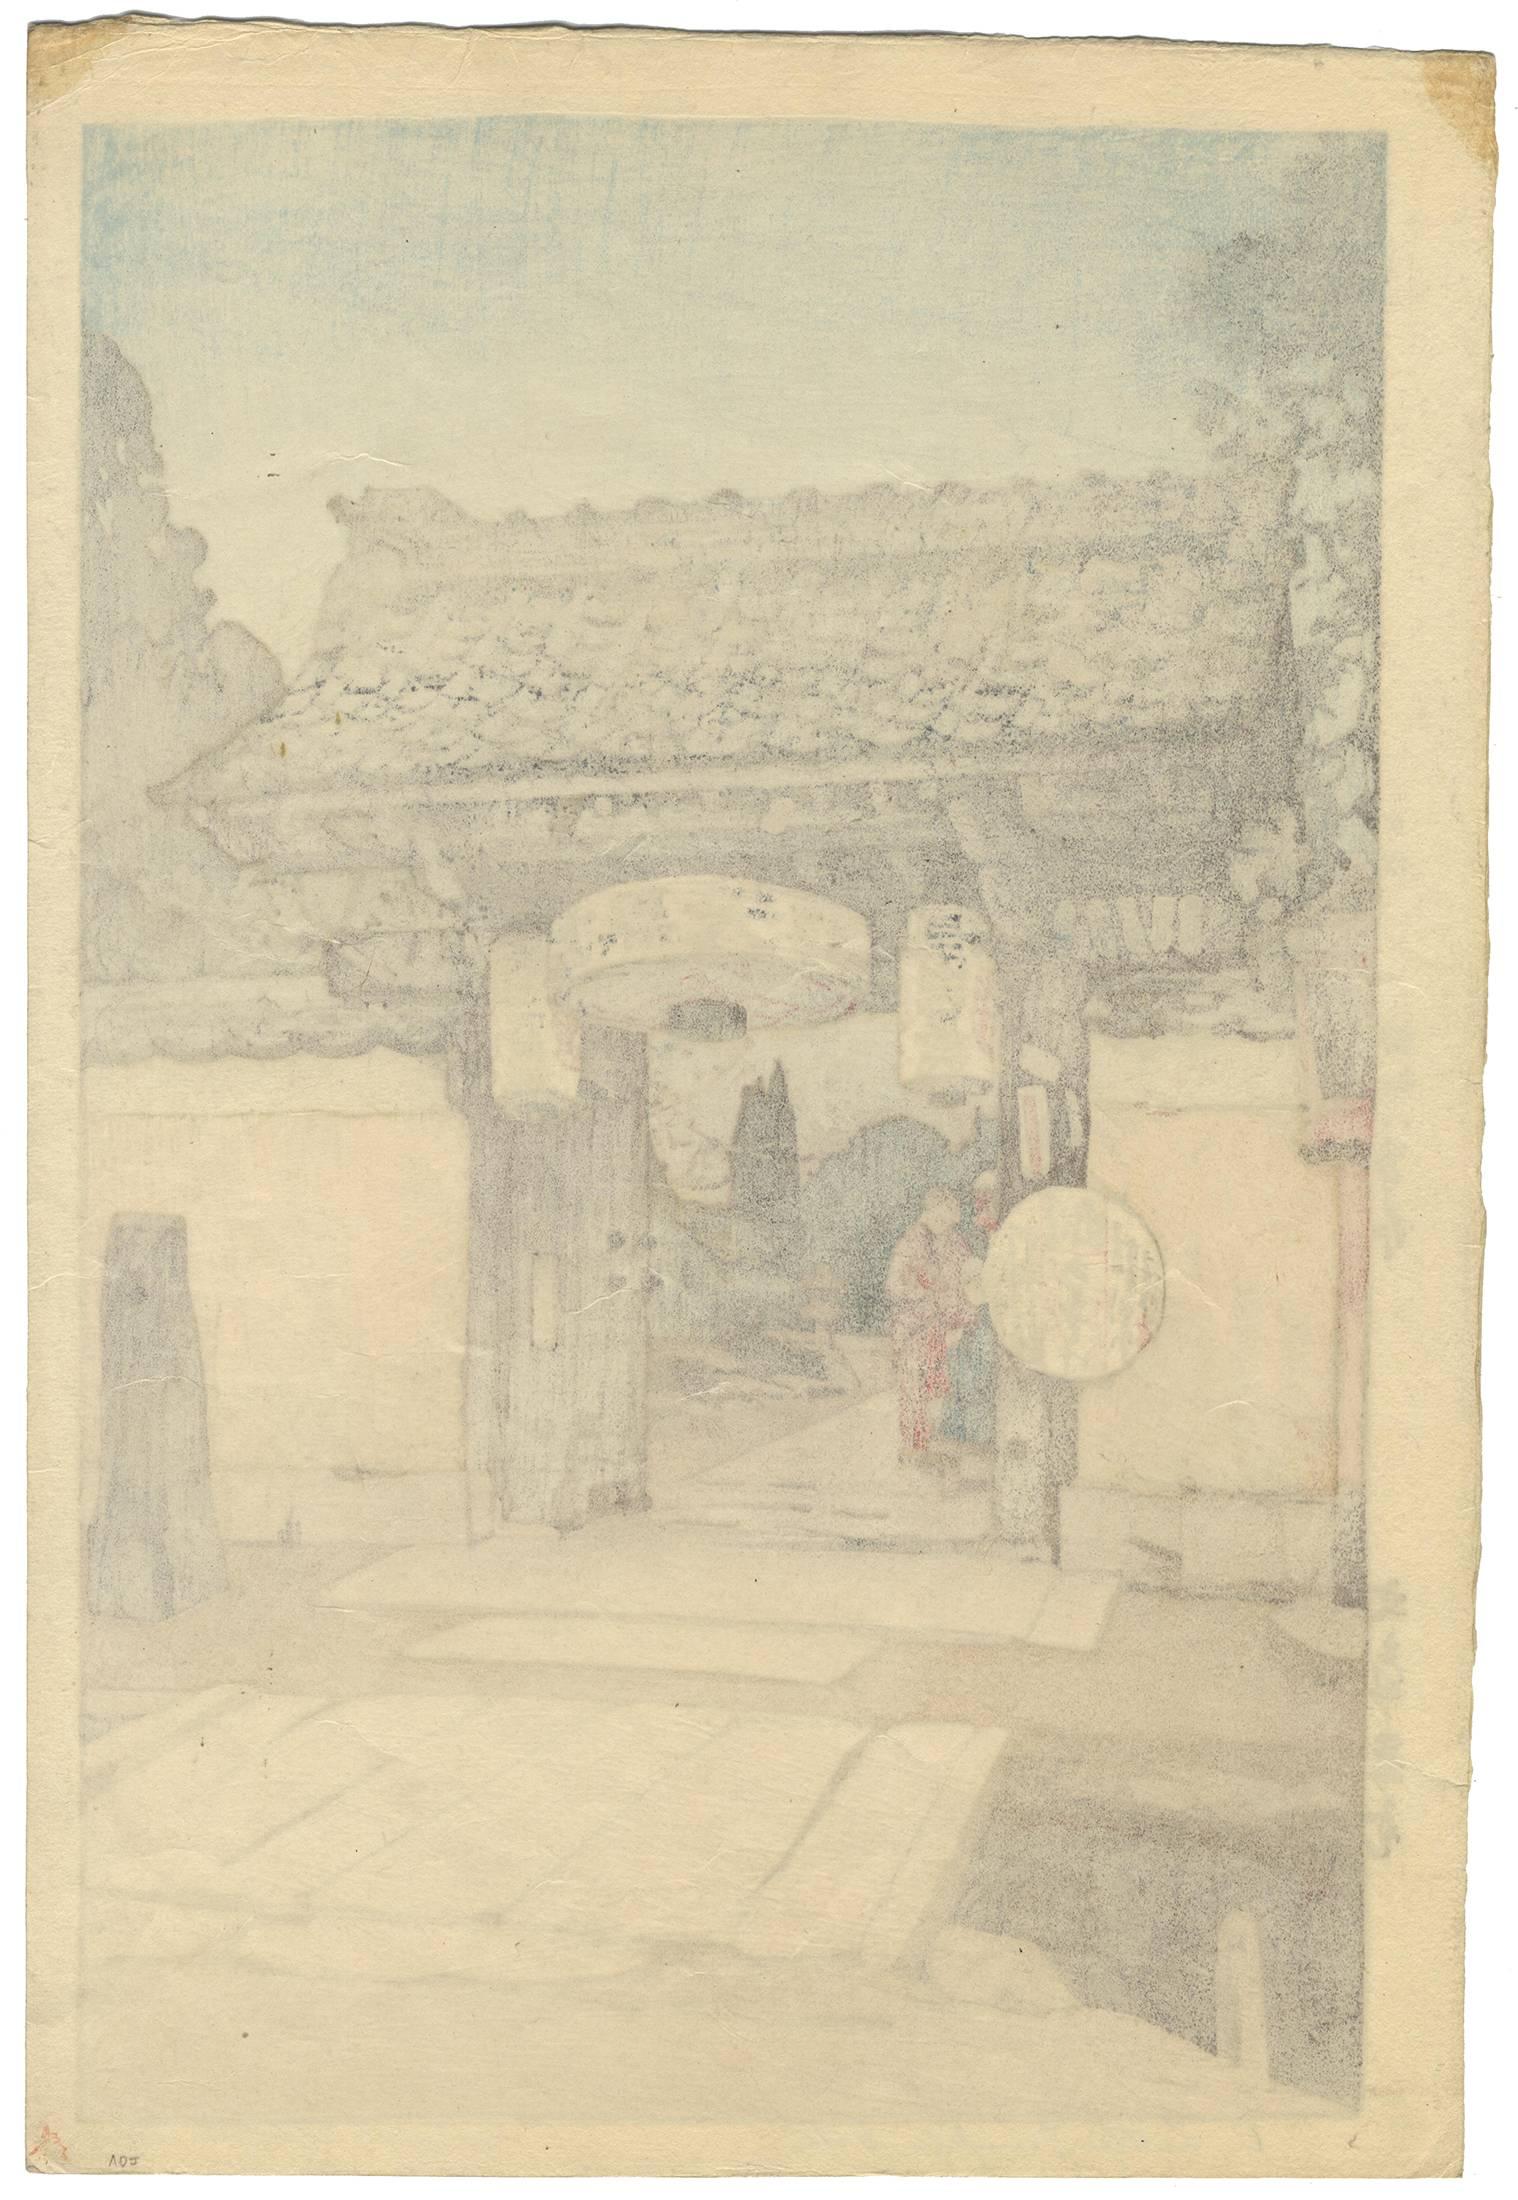 Title: A Little Temple Gate
Artist: Hiroshi Yoshida
Self-published in 1933.
Hand-signed by the artist.

Hiroshi Yoshida was in the habit of titling his prints in both Japanese and English. In this case, the Japanese title "?????"